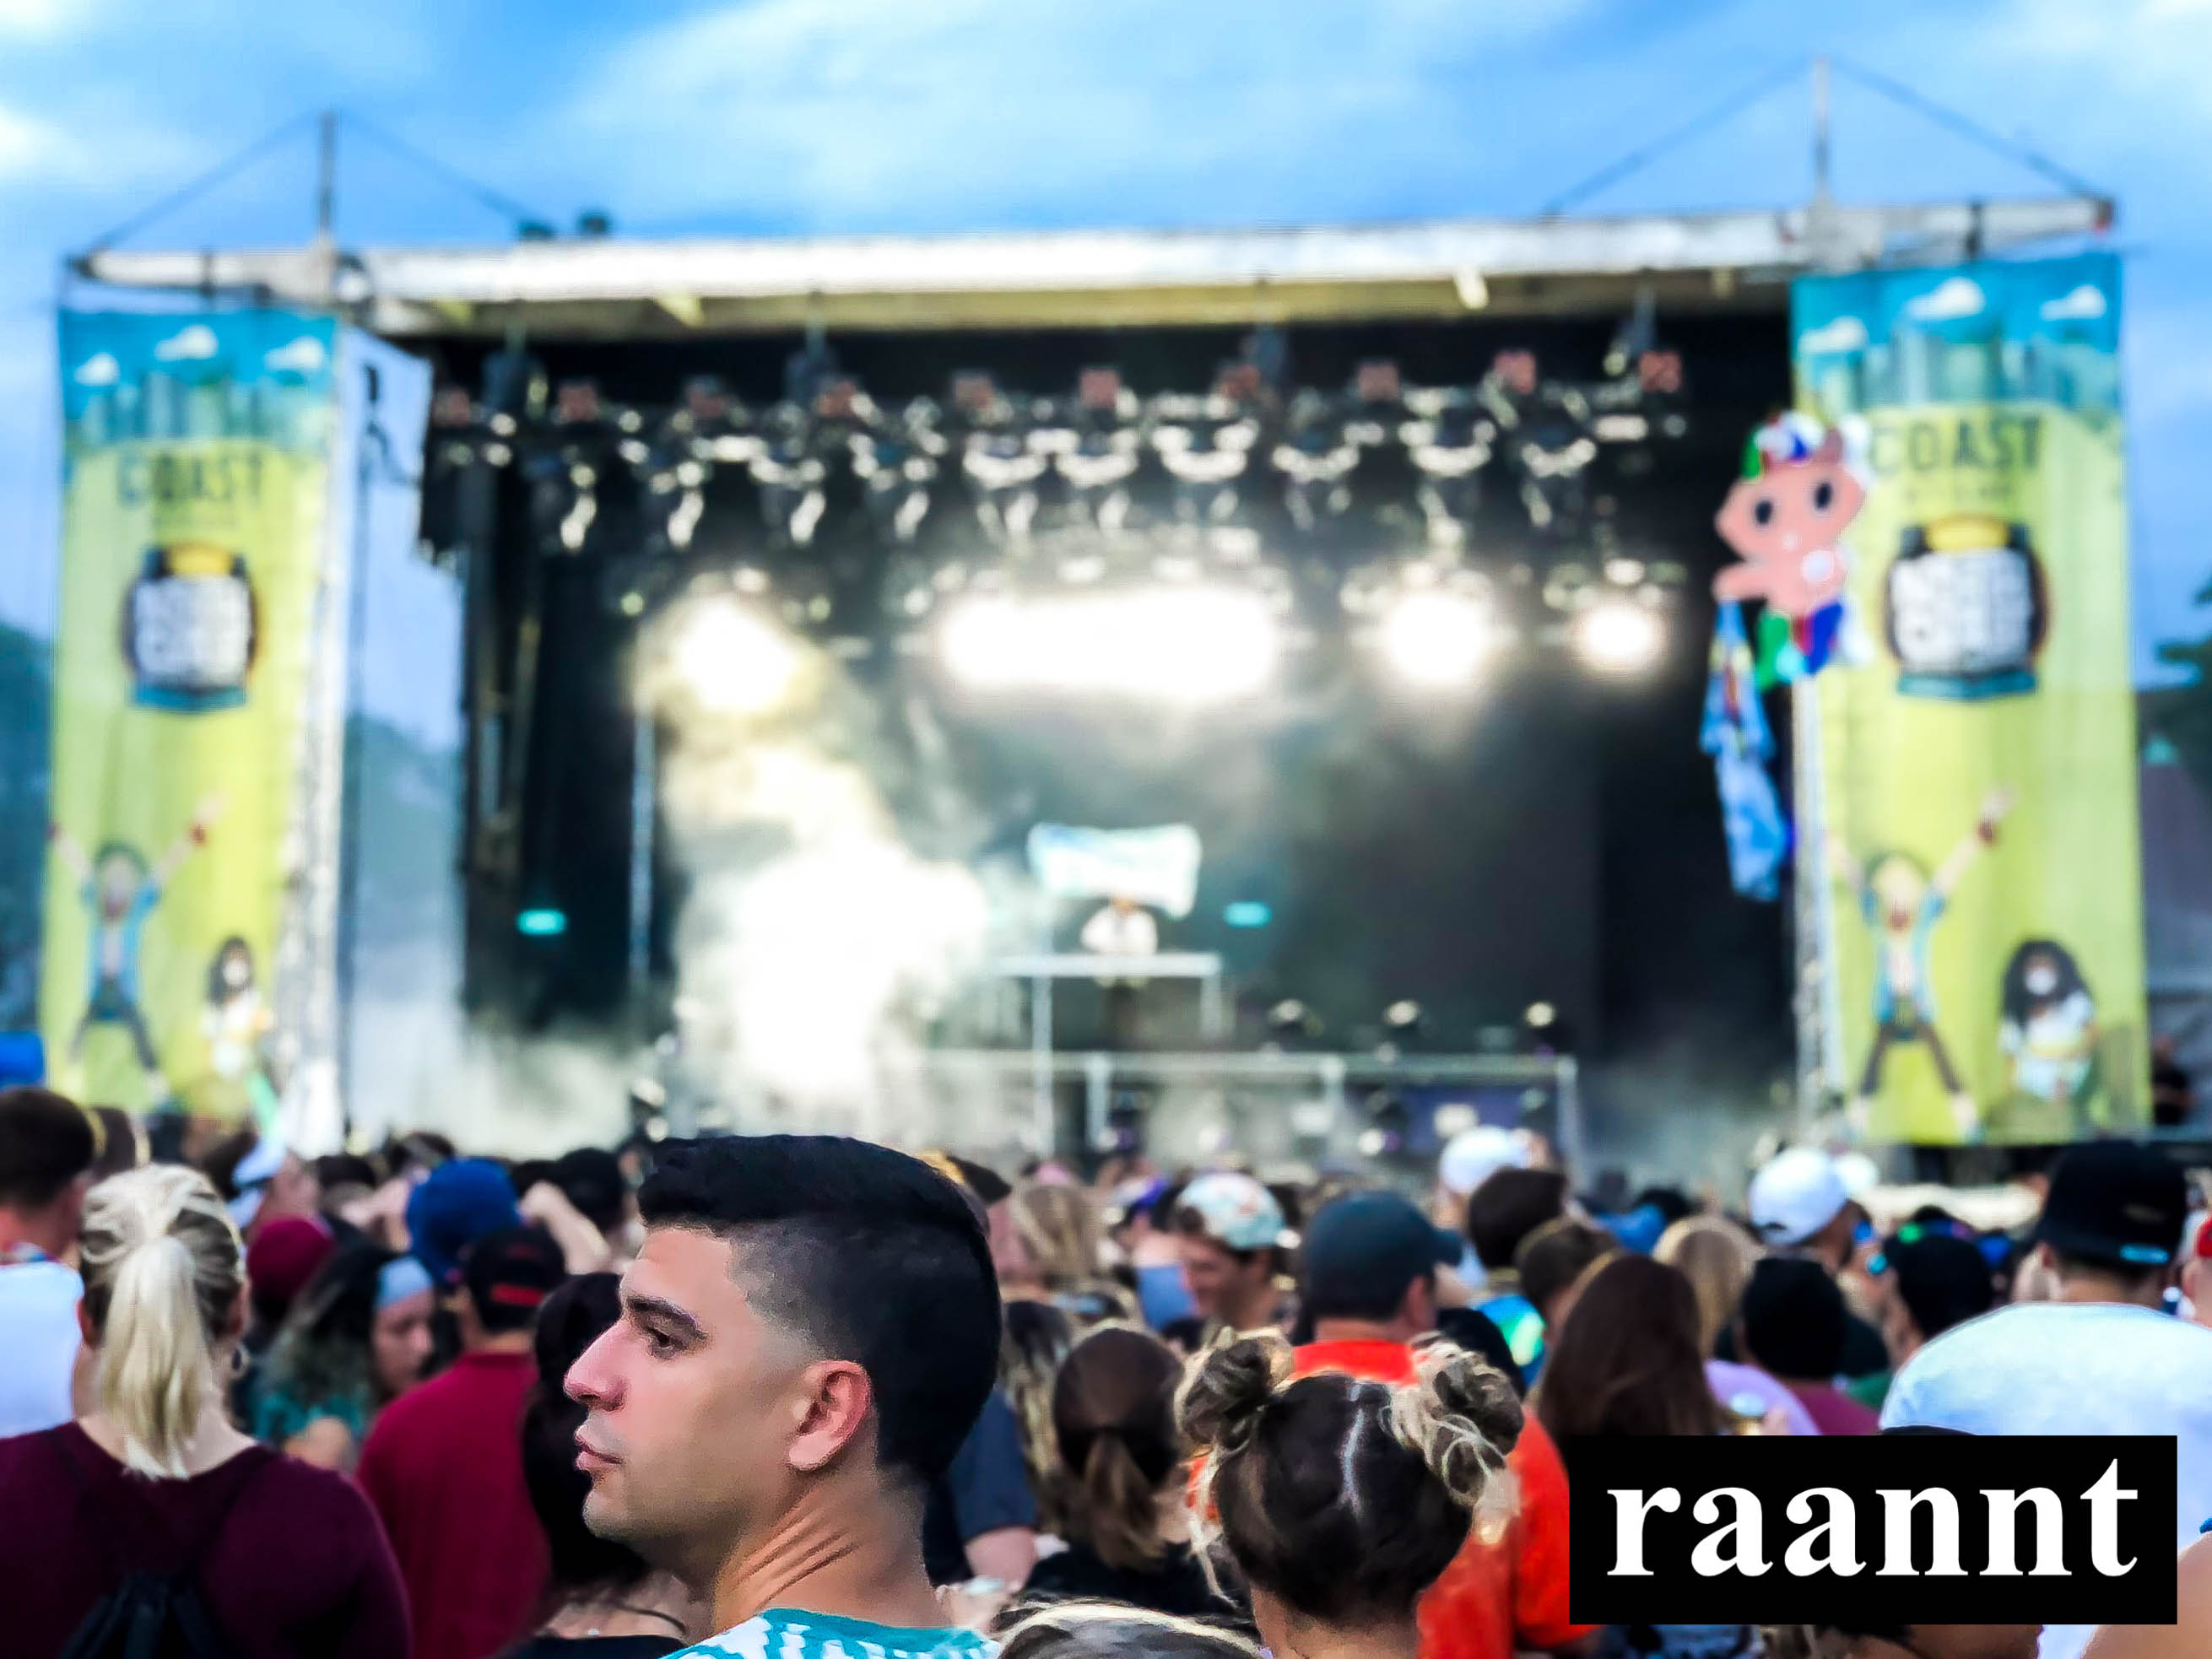 North Coast Music Festival, Chicago, IL. 116K likes. "Summer's Last Stand" Labor Day Weekend 2018 at Union Park Chicago, IL || northcoastfestival.com.